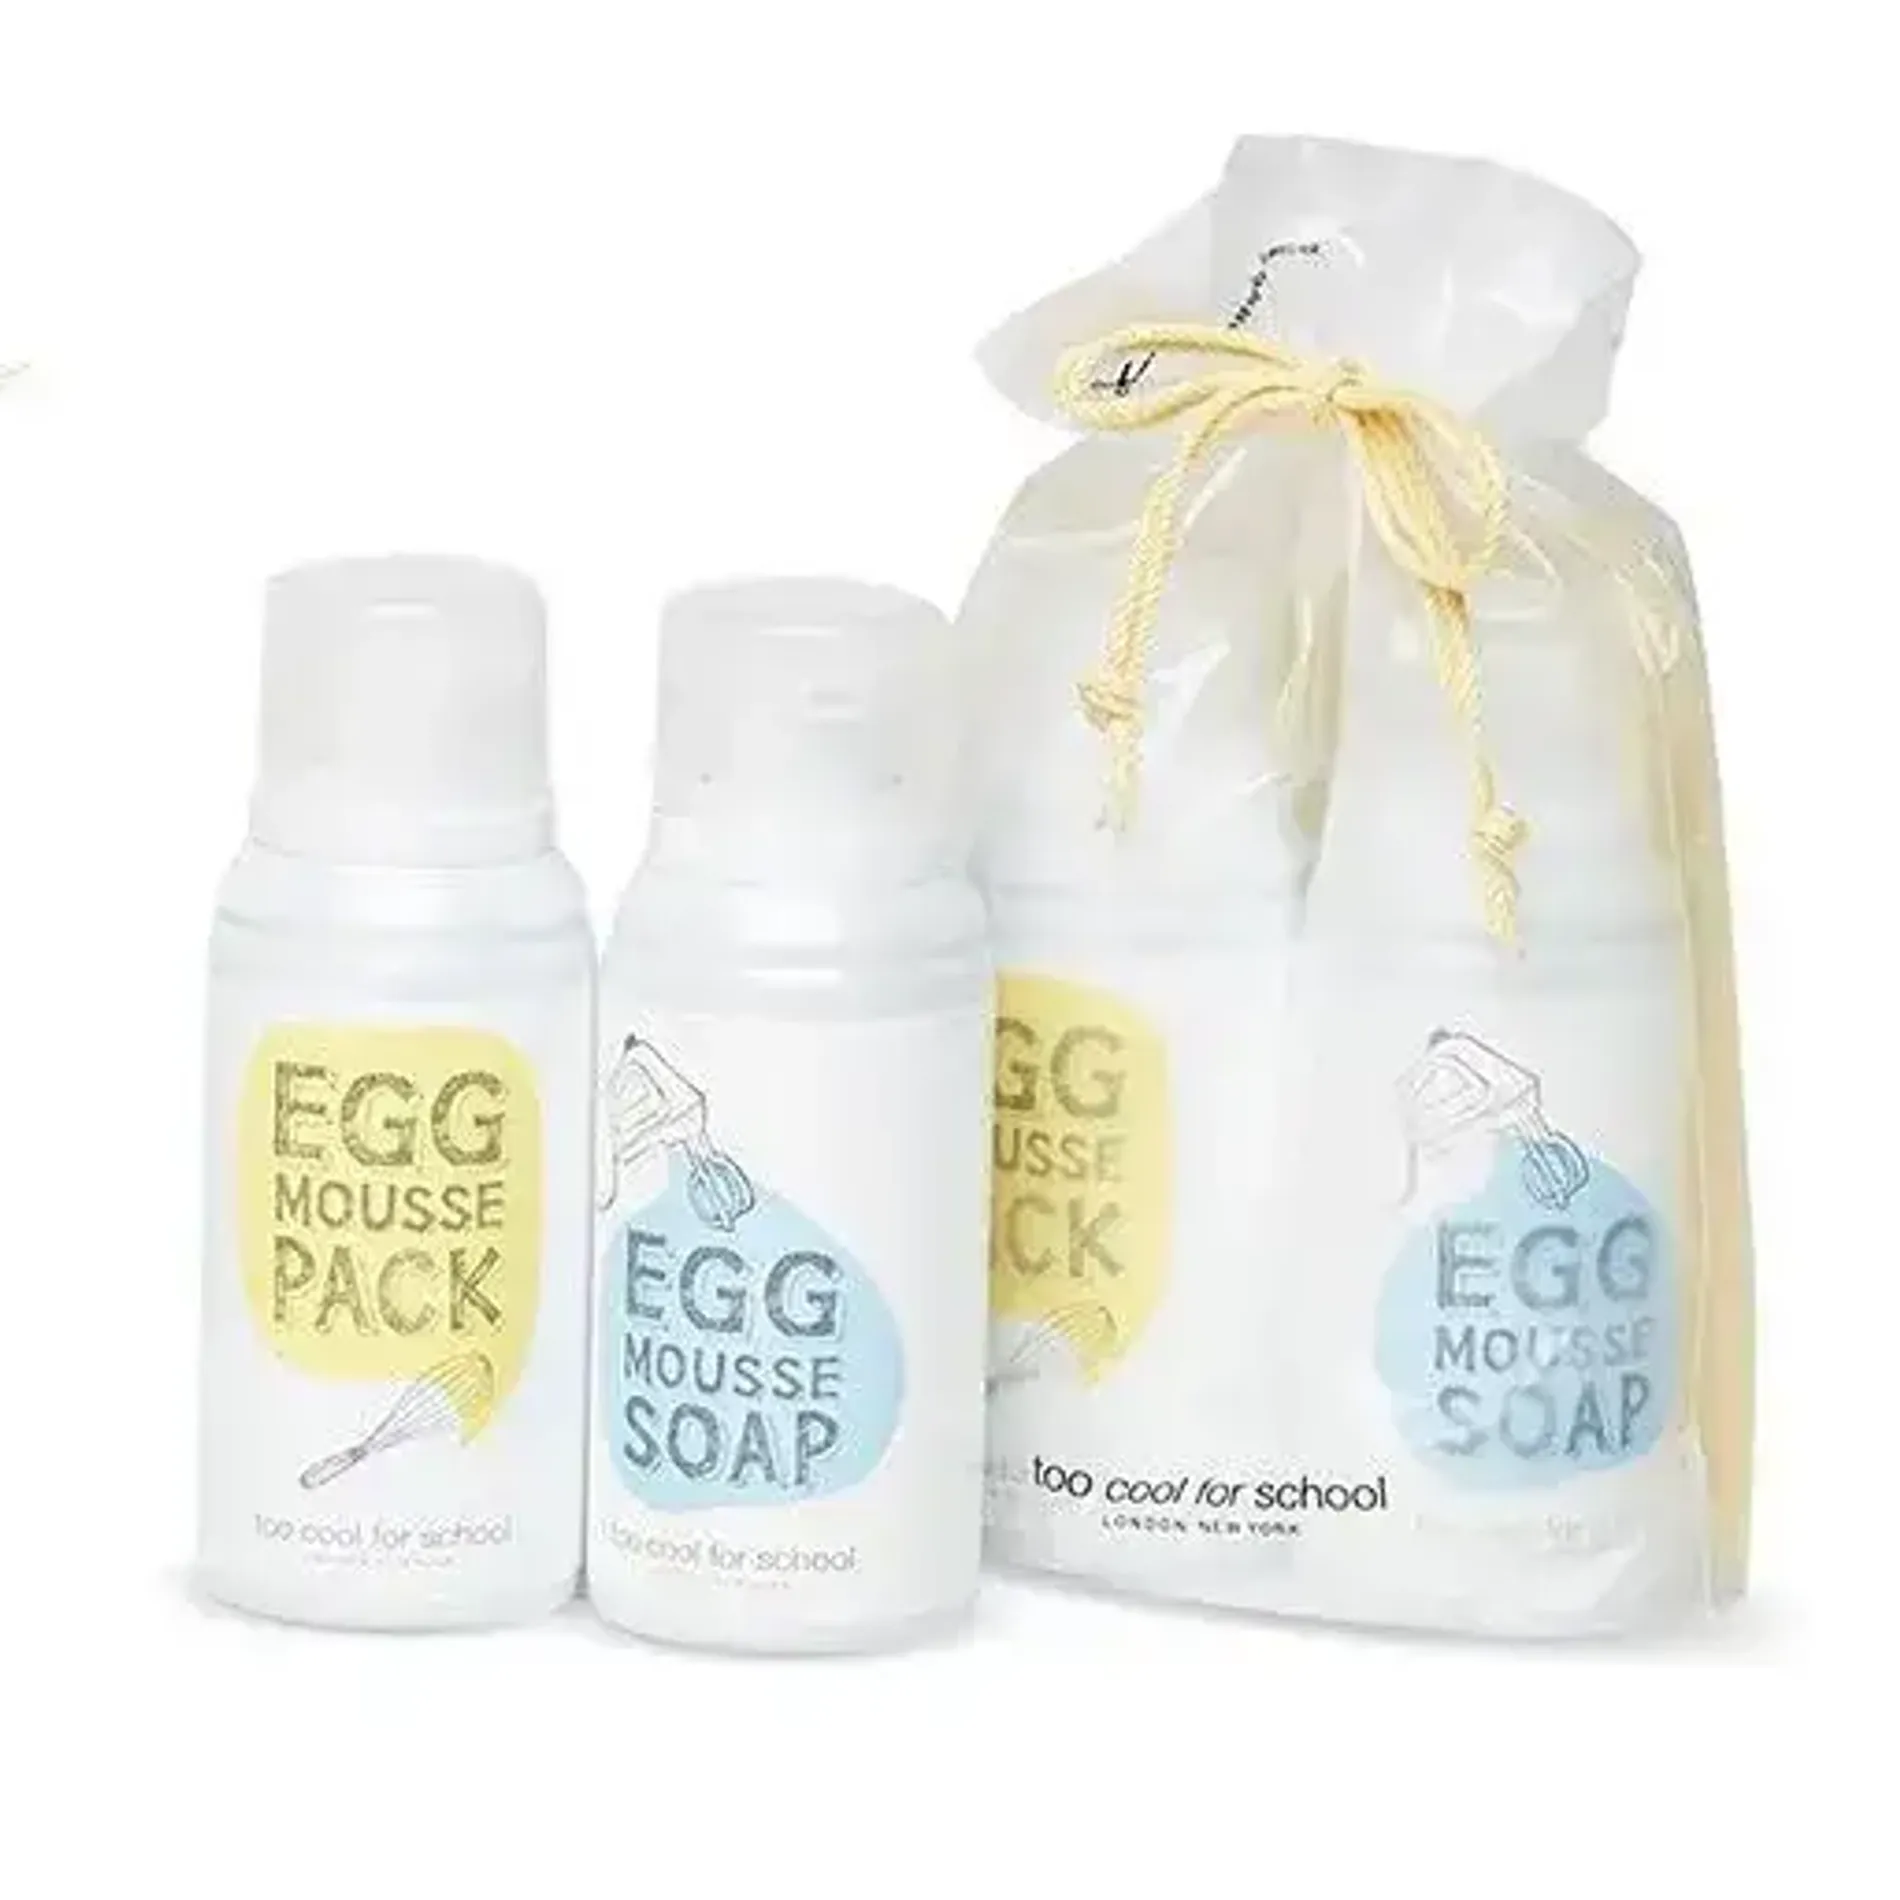 bo-sua-rua-mat-too-cool-for-school-egg-mousse-pack-soap-special-2sp-1